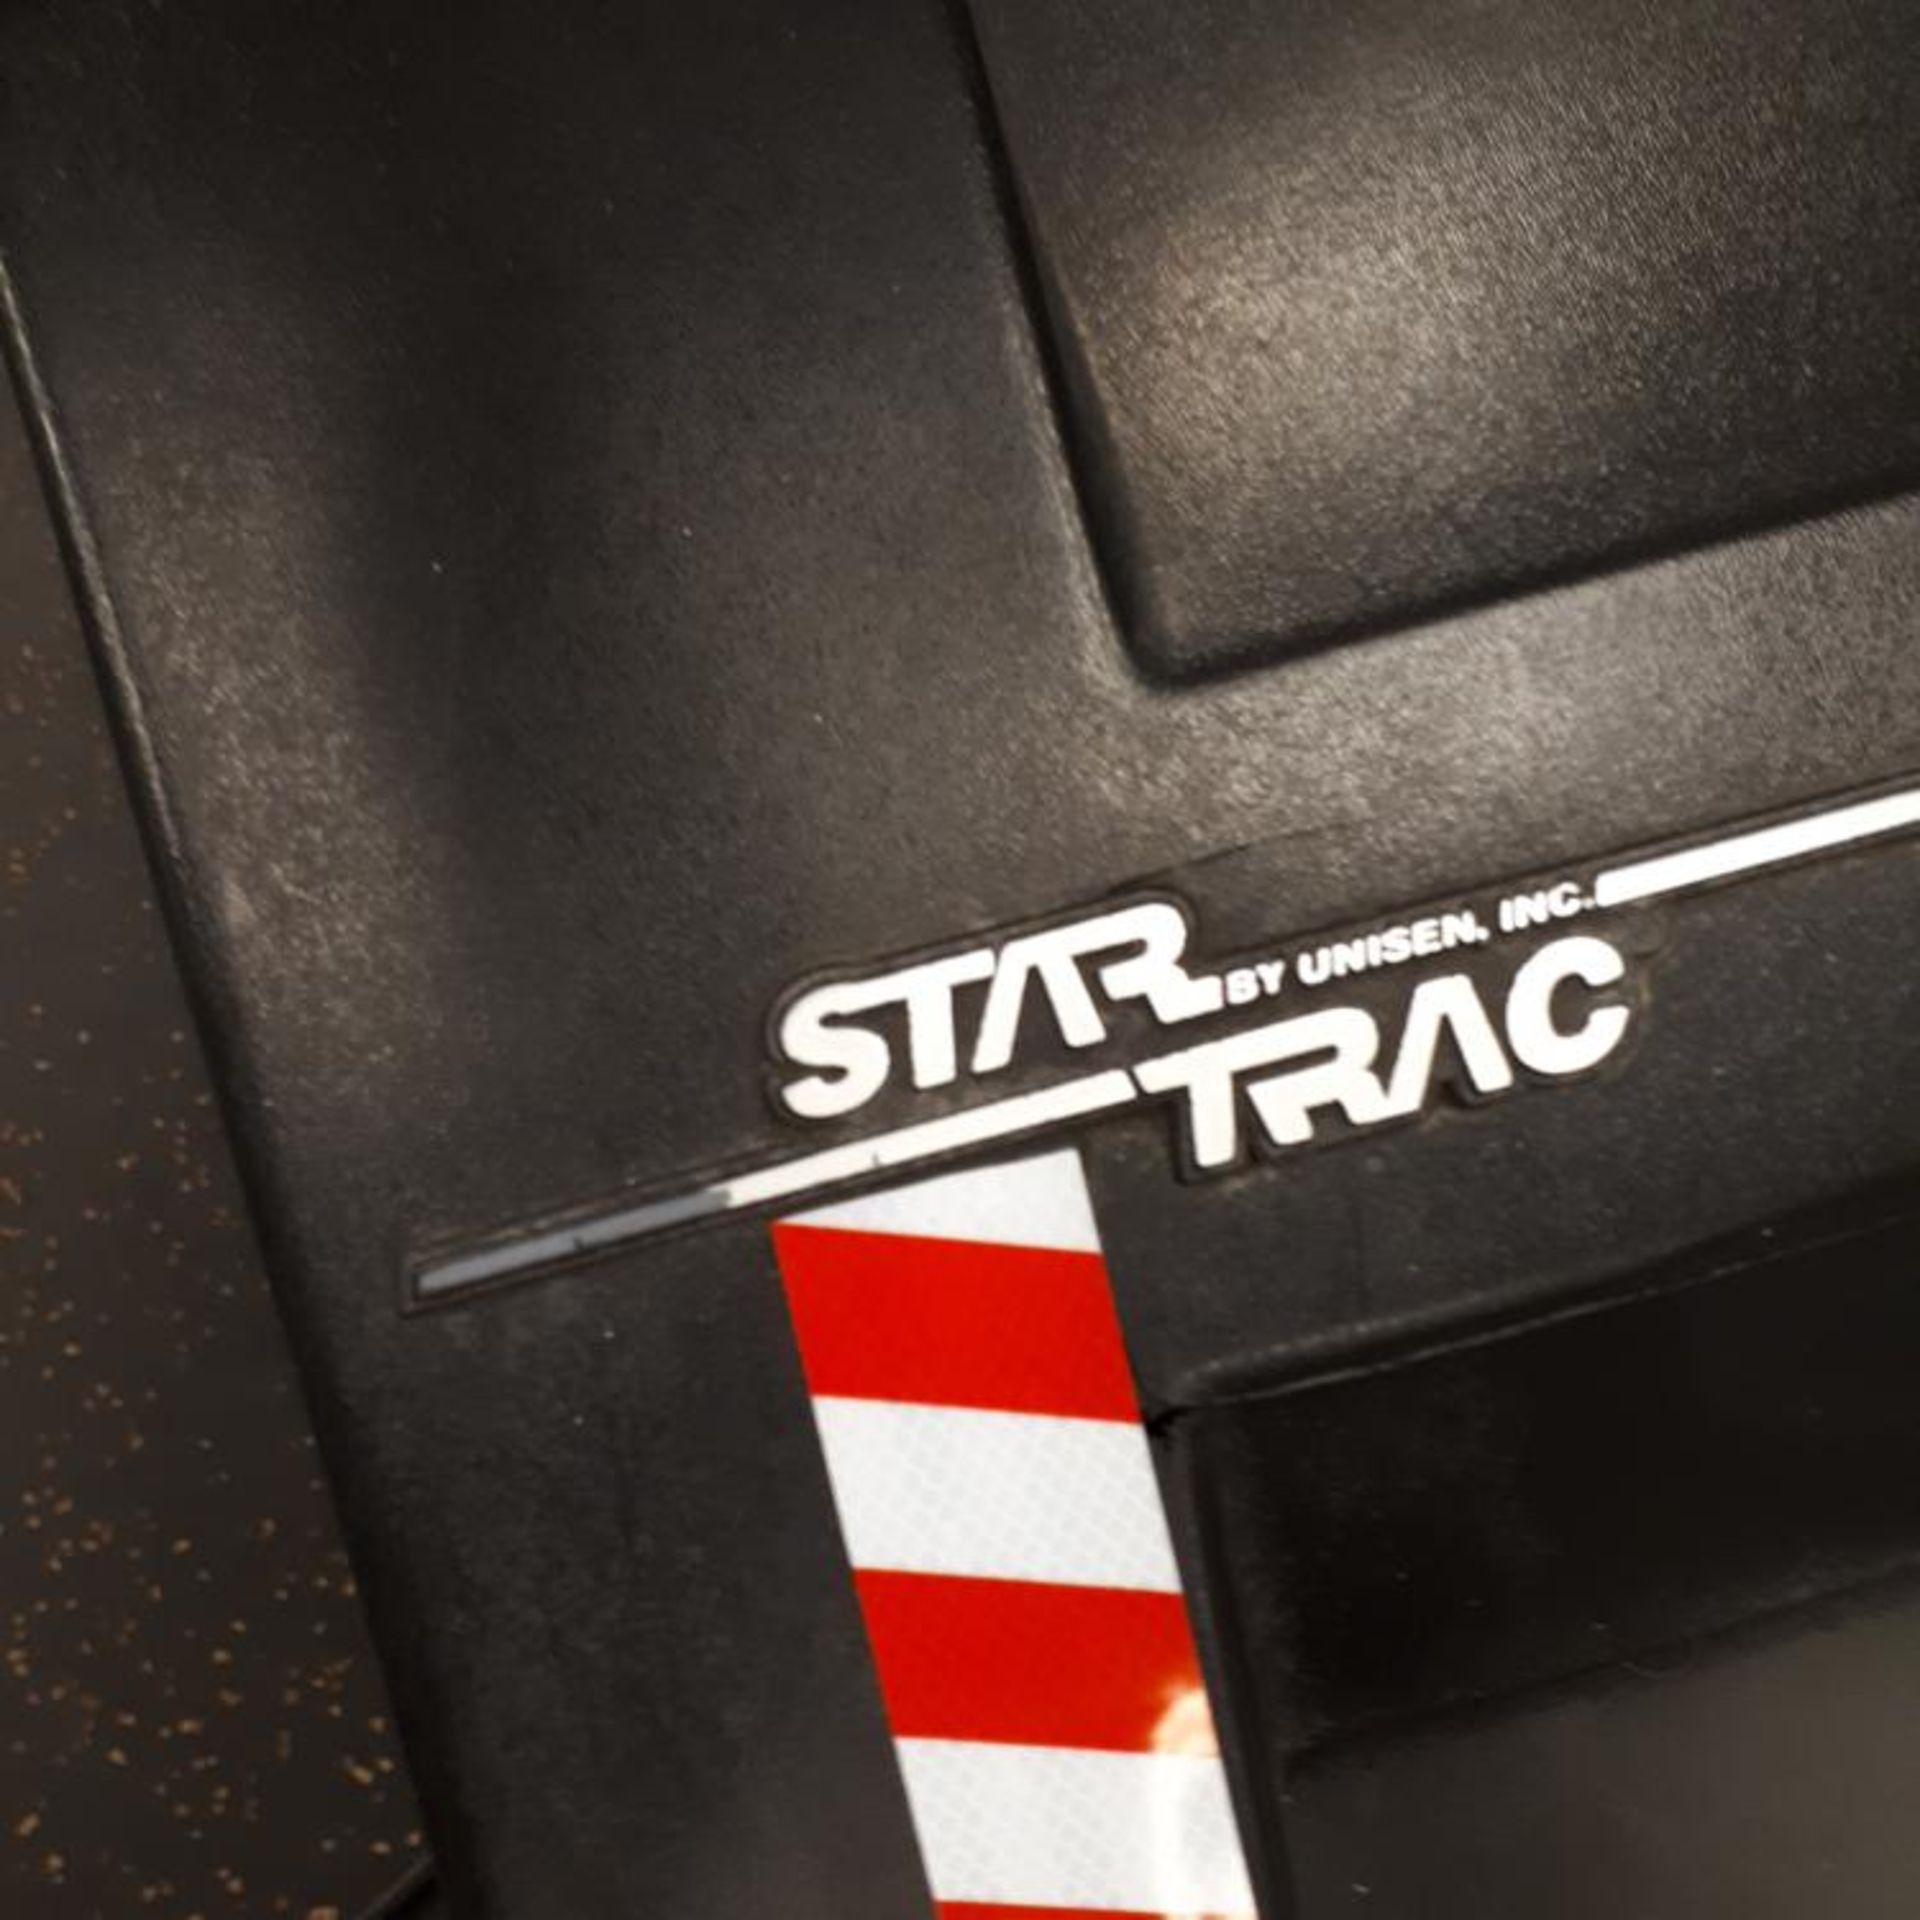 TAPIS ROULANT STAR TRAC 2000 - Image 2 of 6